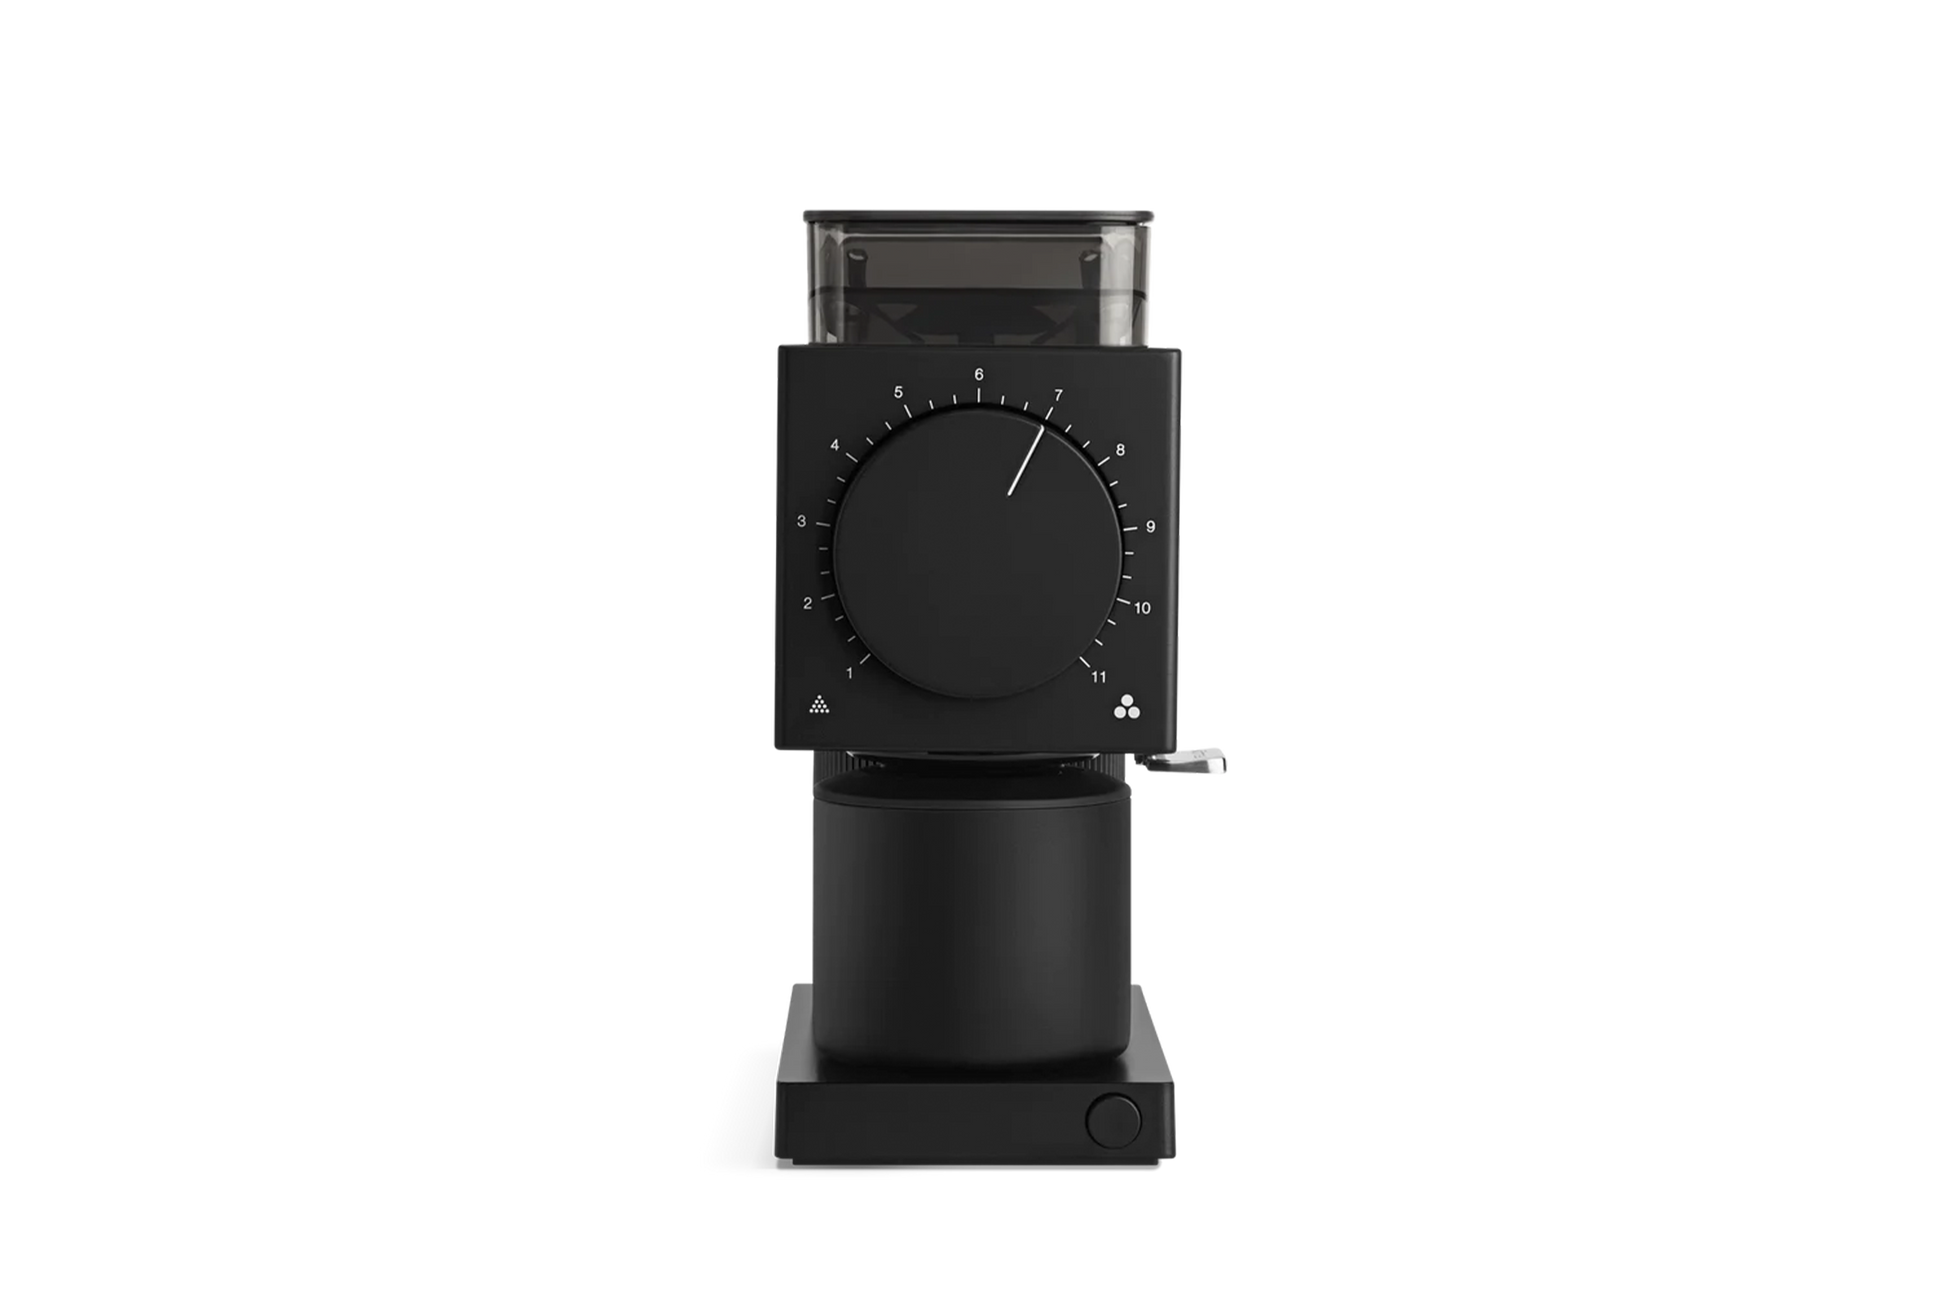 Designed specifically for filter brewing, the Ode grinder fuses professional functionality with design-driven form to offer a compelling grinder for coffee enthusiasts.